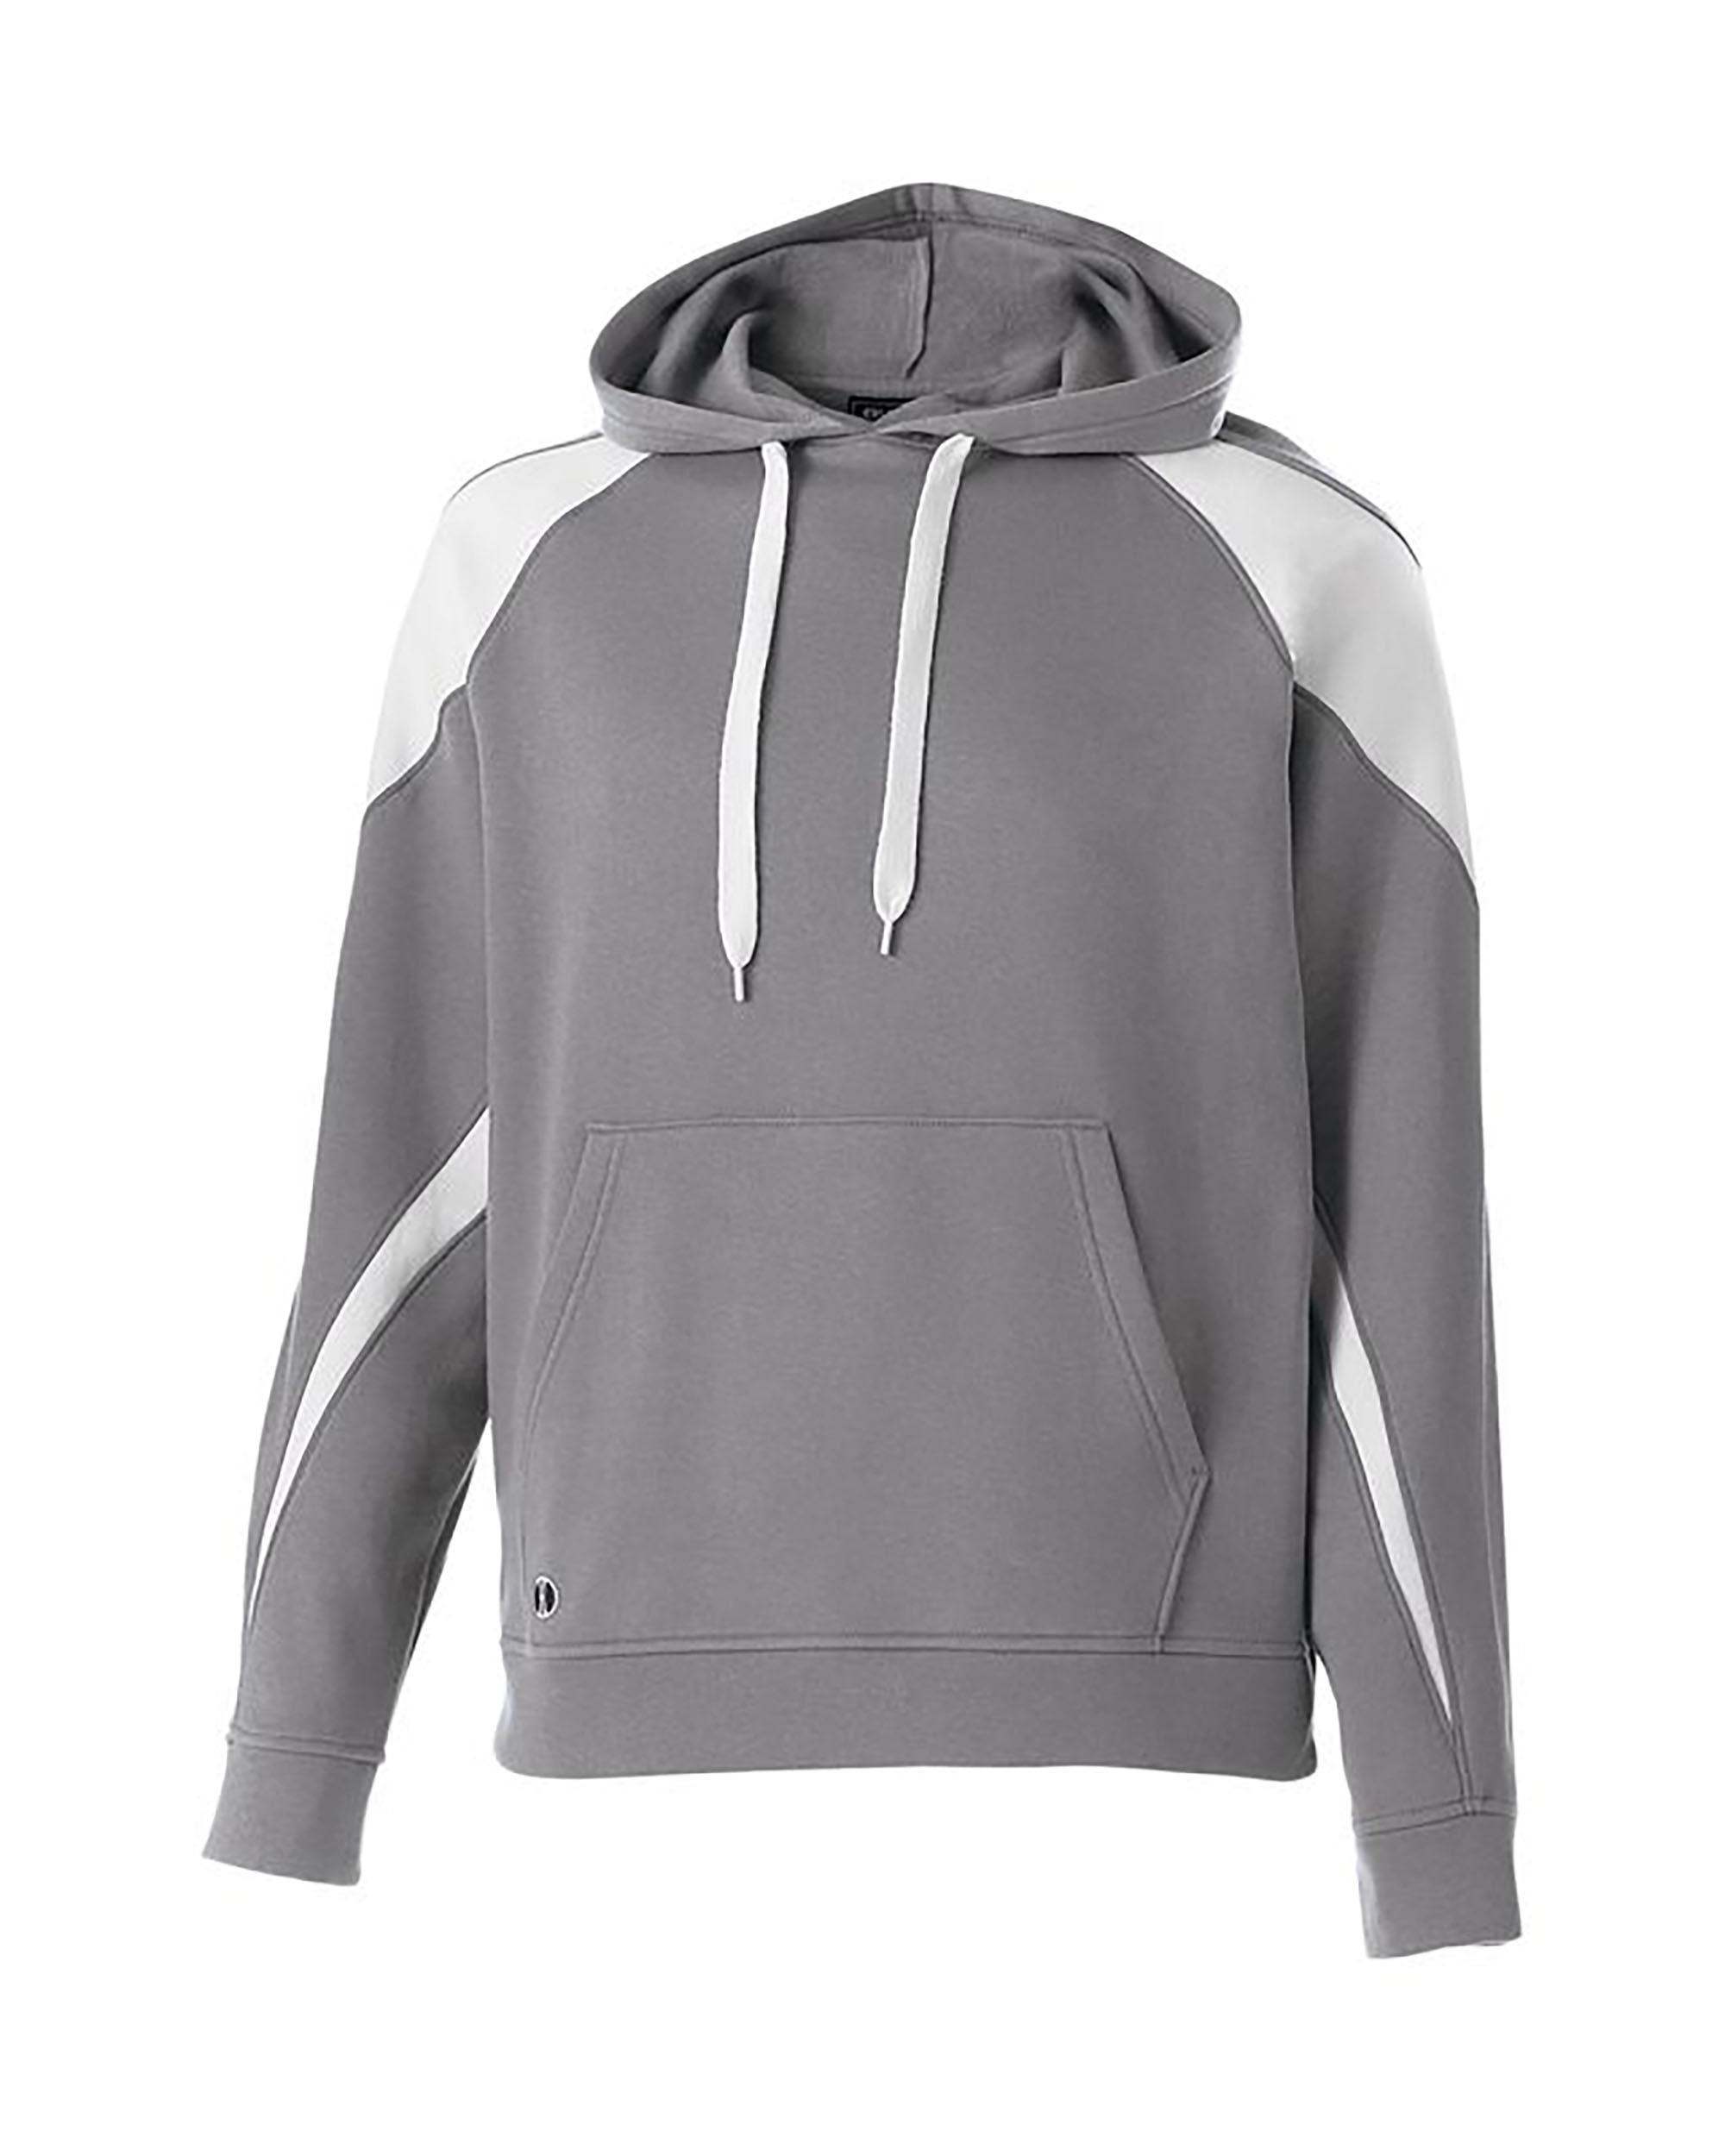 Holloway 229546 Prospect Hoodie, shown in Charcoal Heather/White